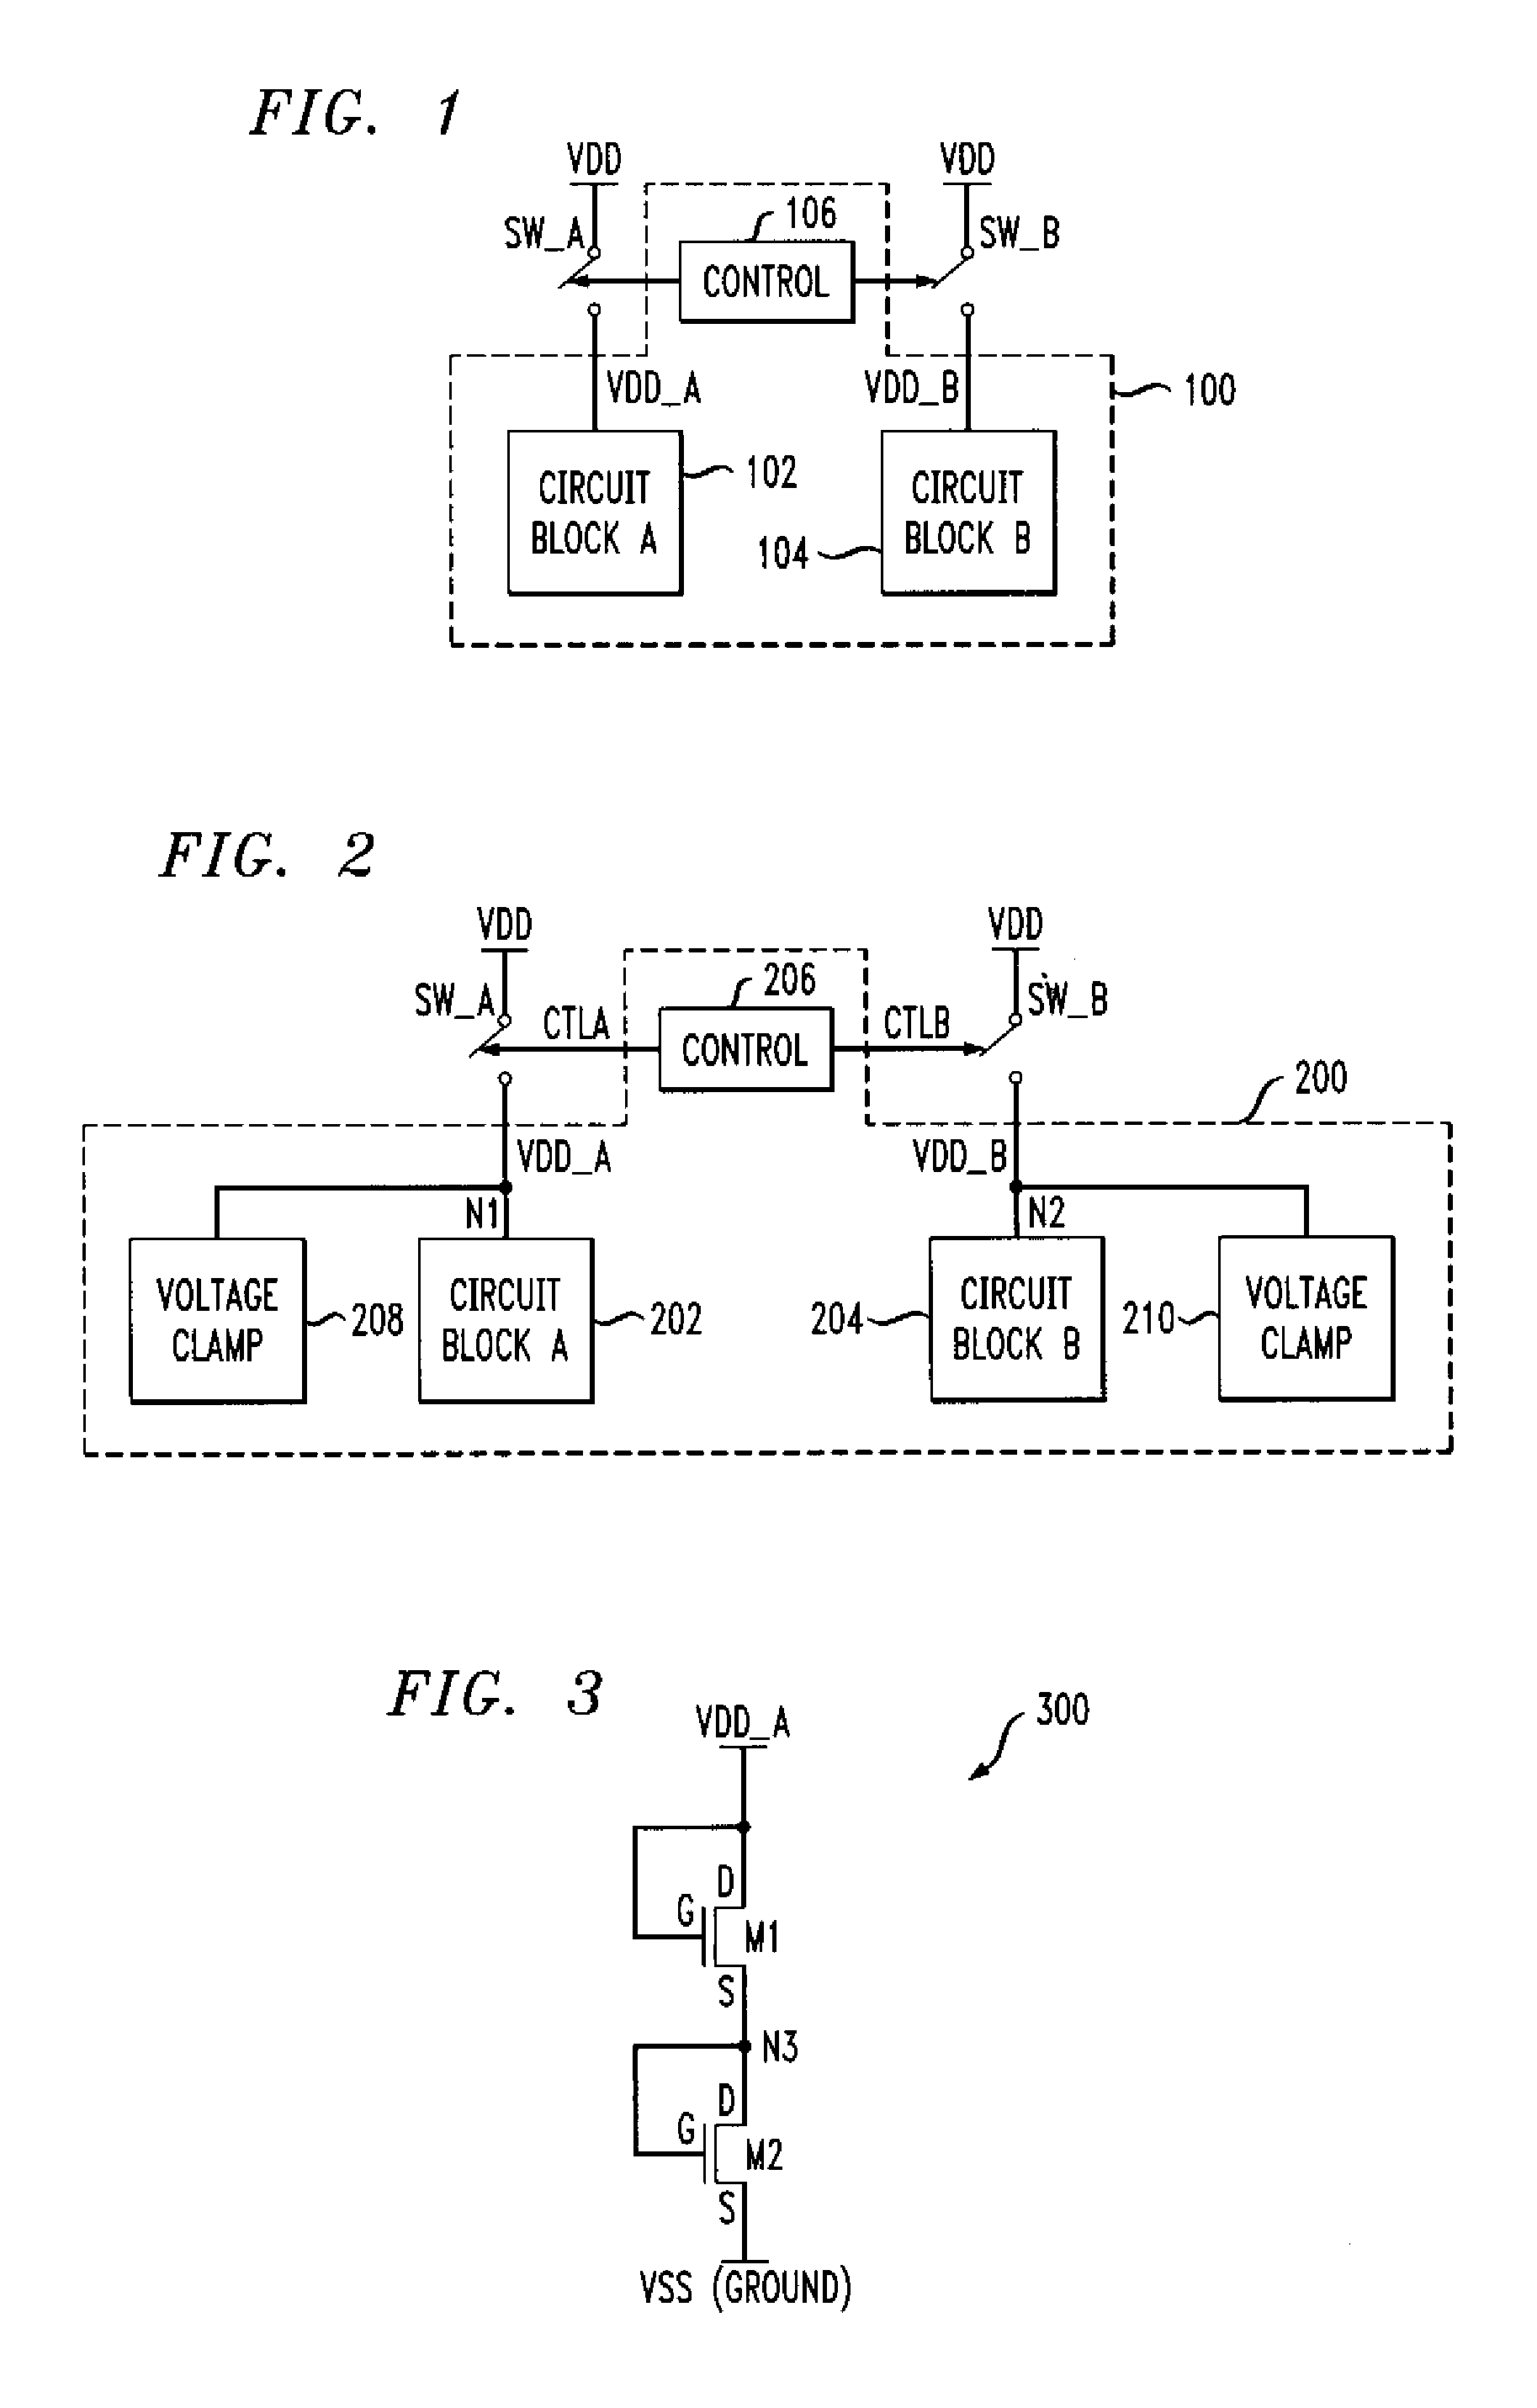 Method and Apparatus for Improving Reliability of an Integrated Circuit Having Multiple Power Domains